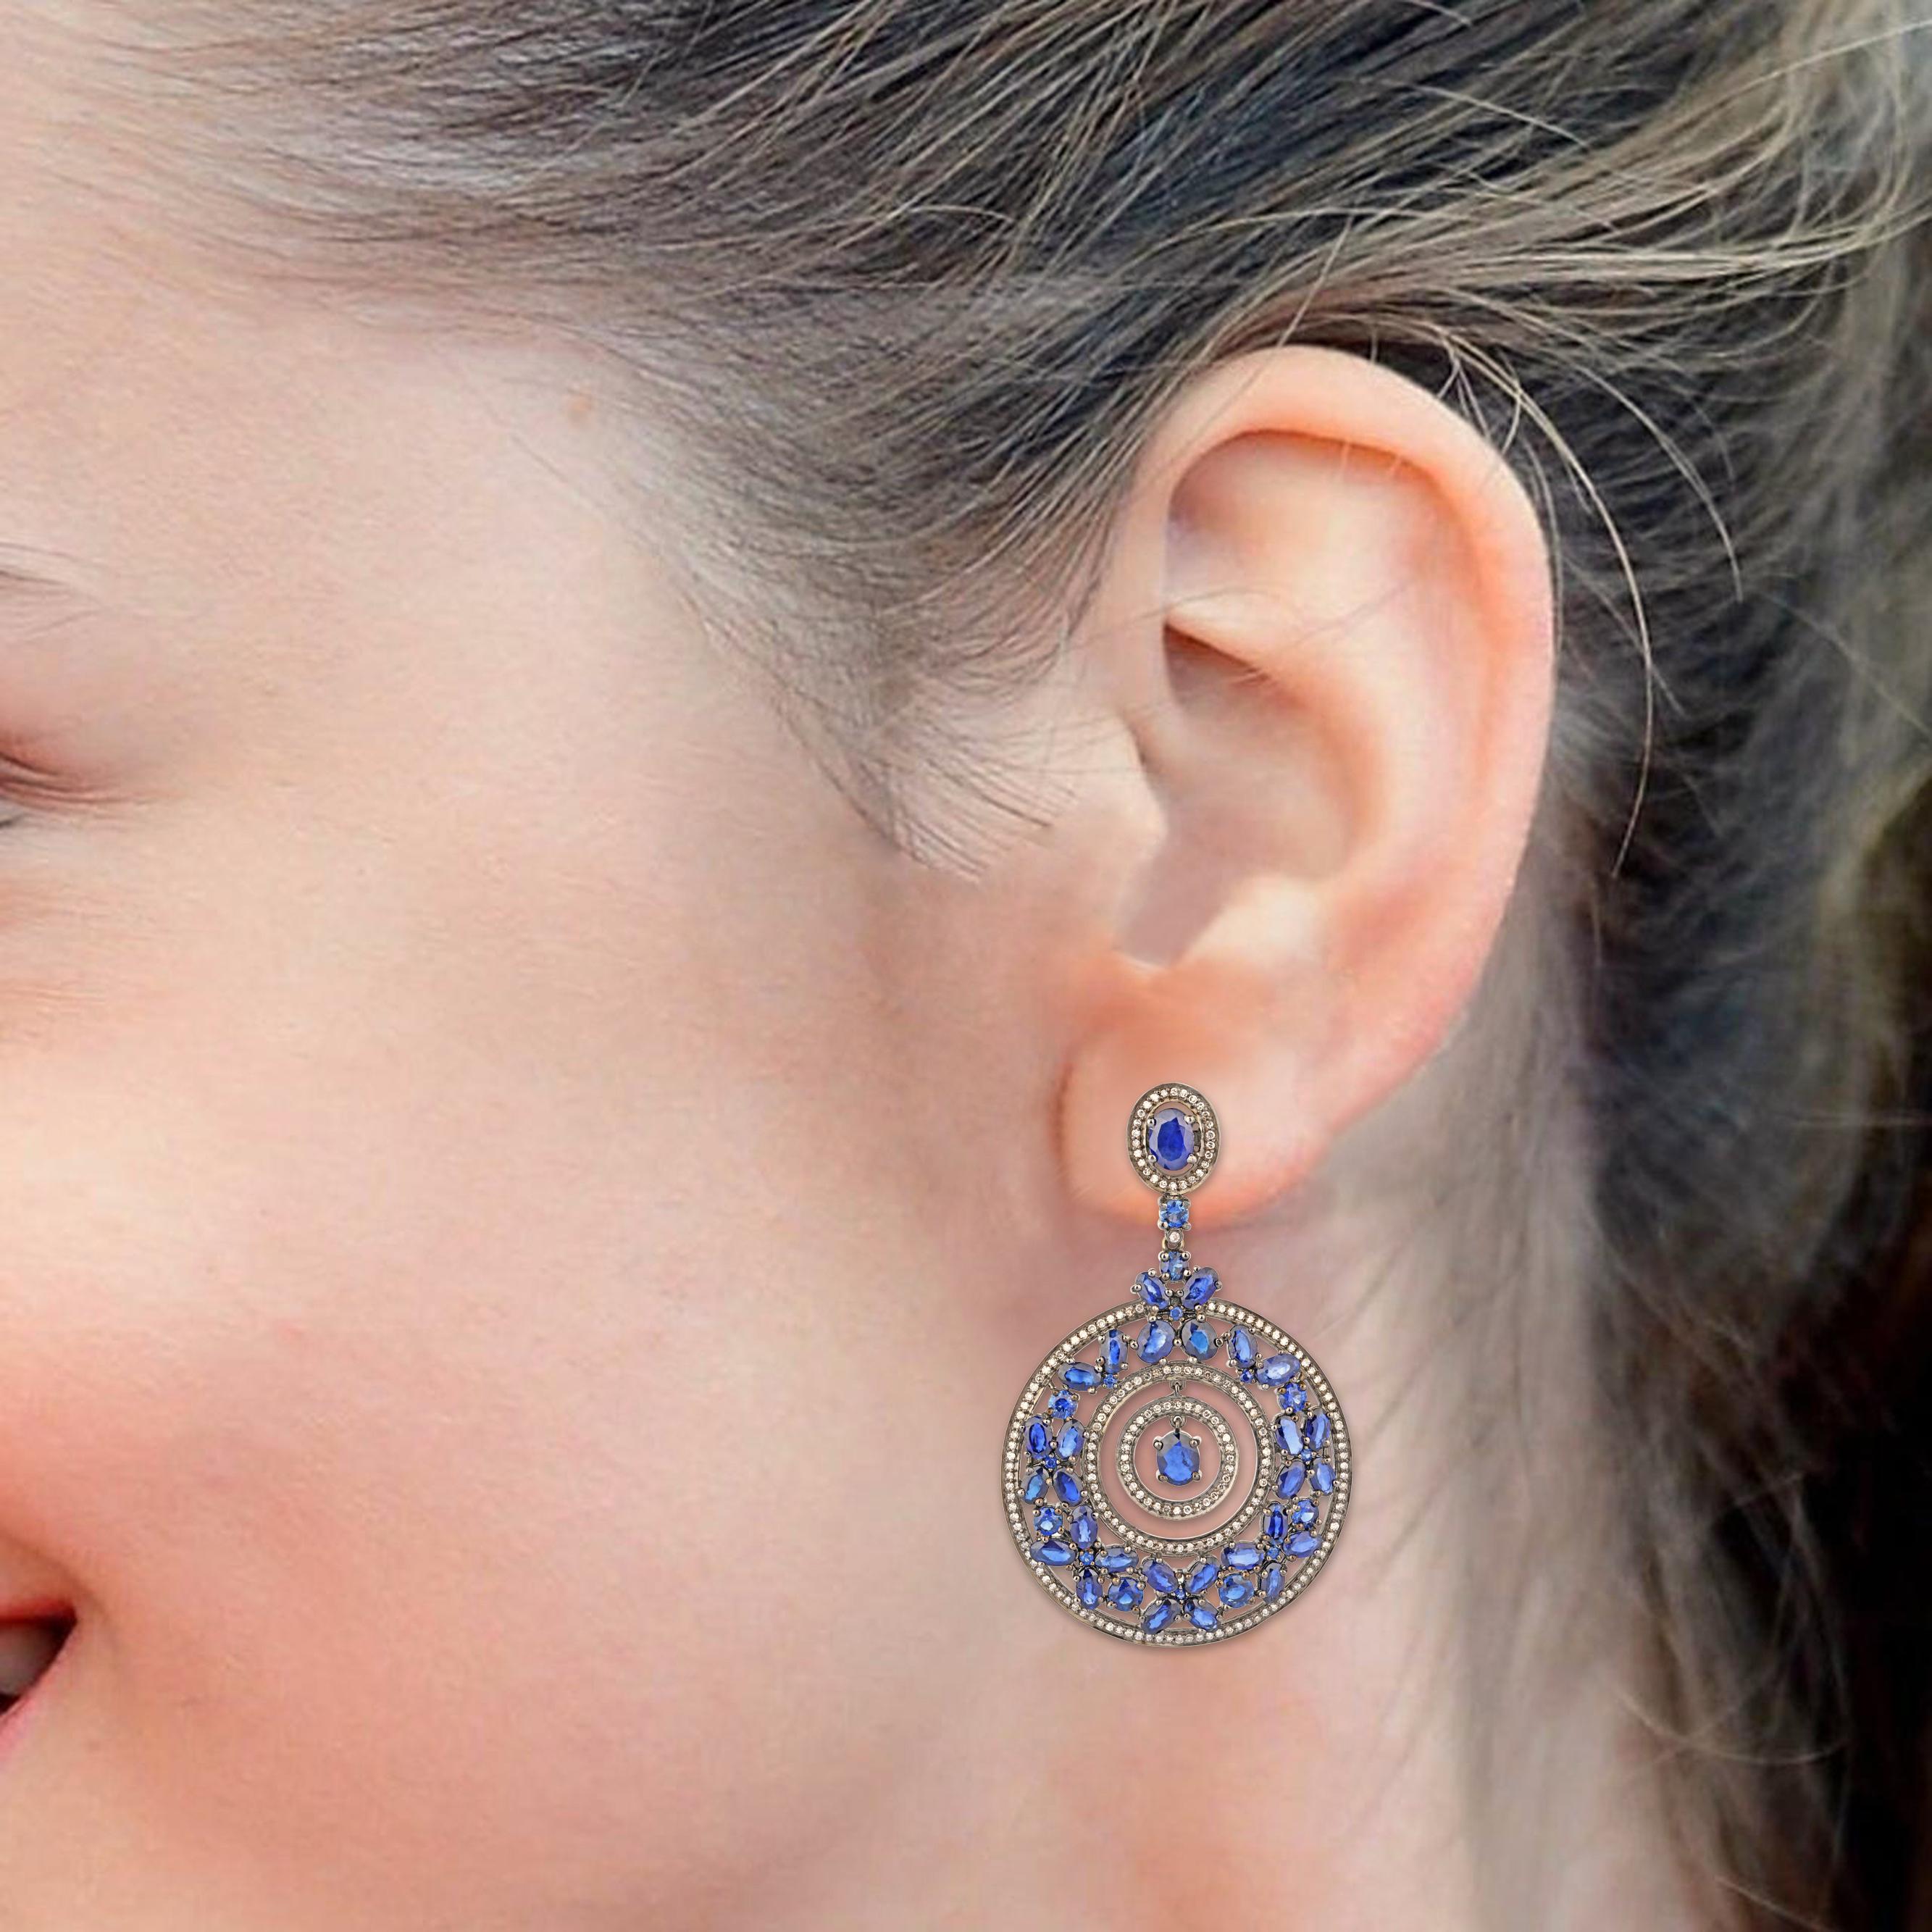 11.50 Carat Sapphire and Diamond Cocktail Earrings

Nothing glams a party better than some exquisite pieces of jewelry to adorn. A perfect combination of some finest diamonds and gemstones is all you need to look your most graceful at any party. You